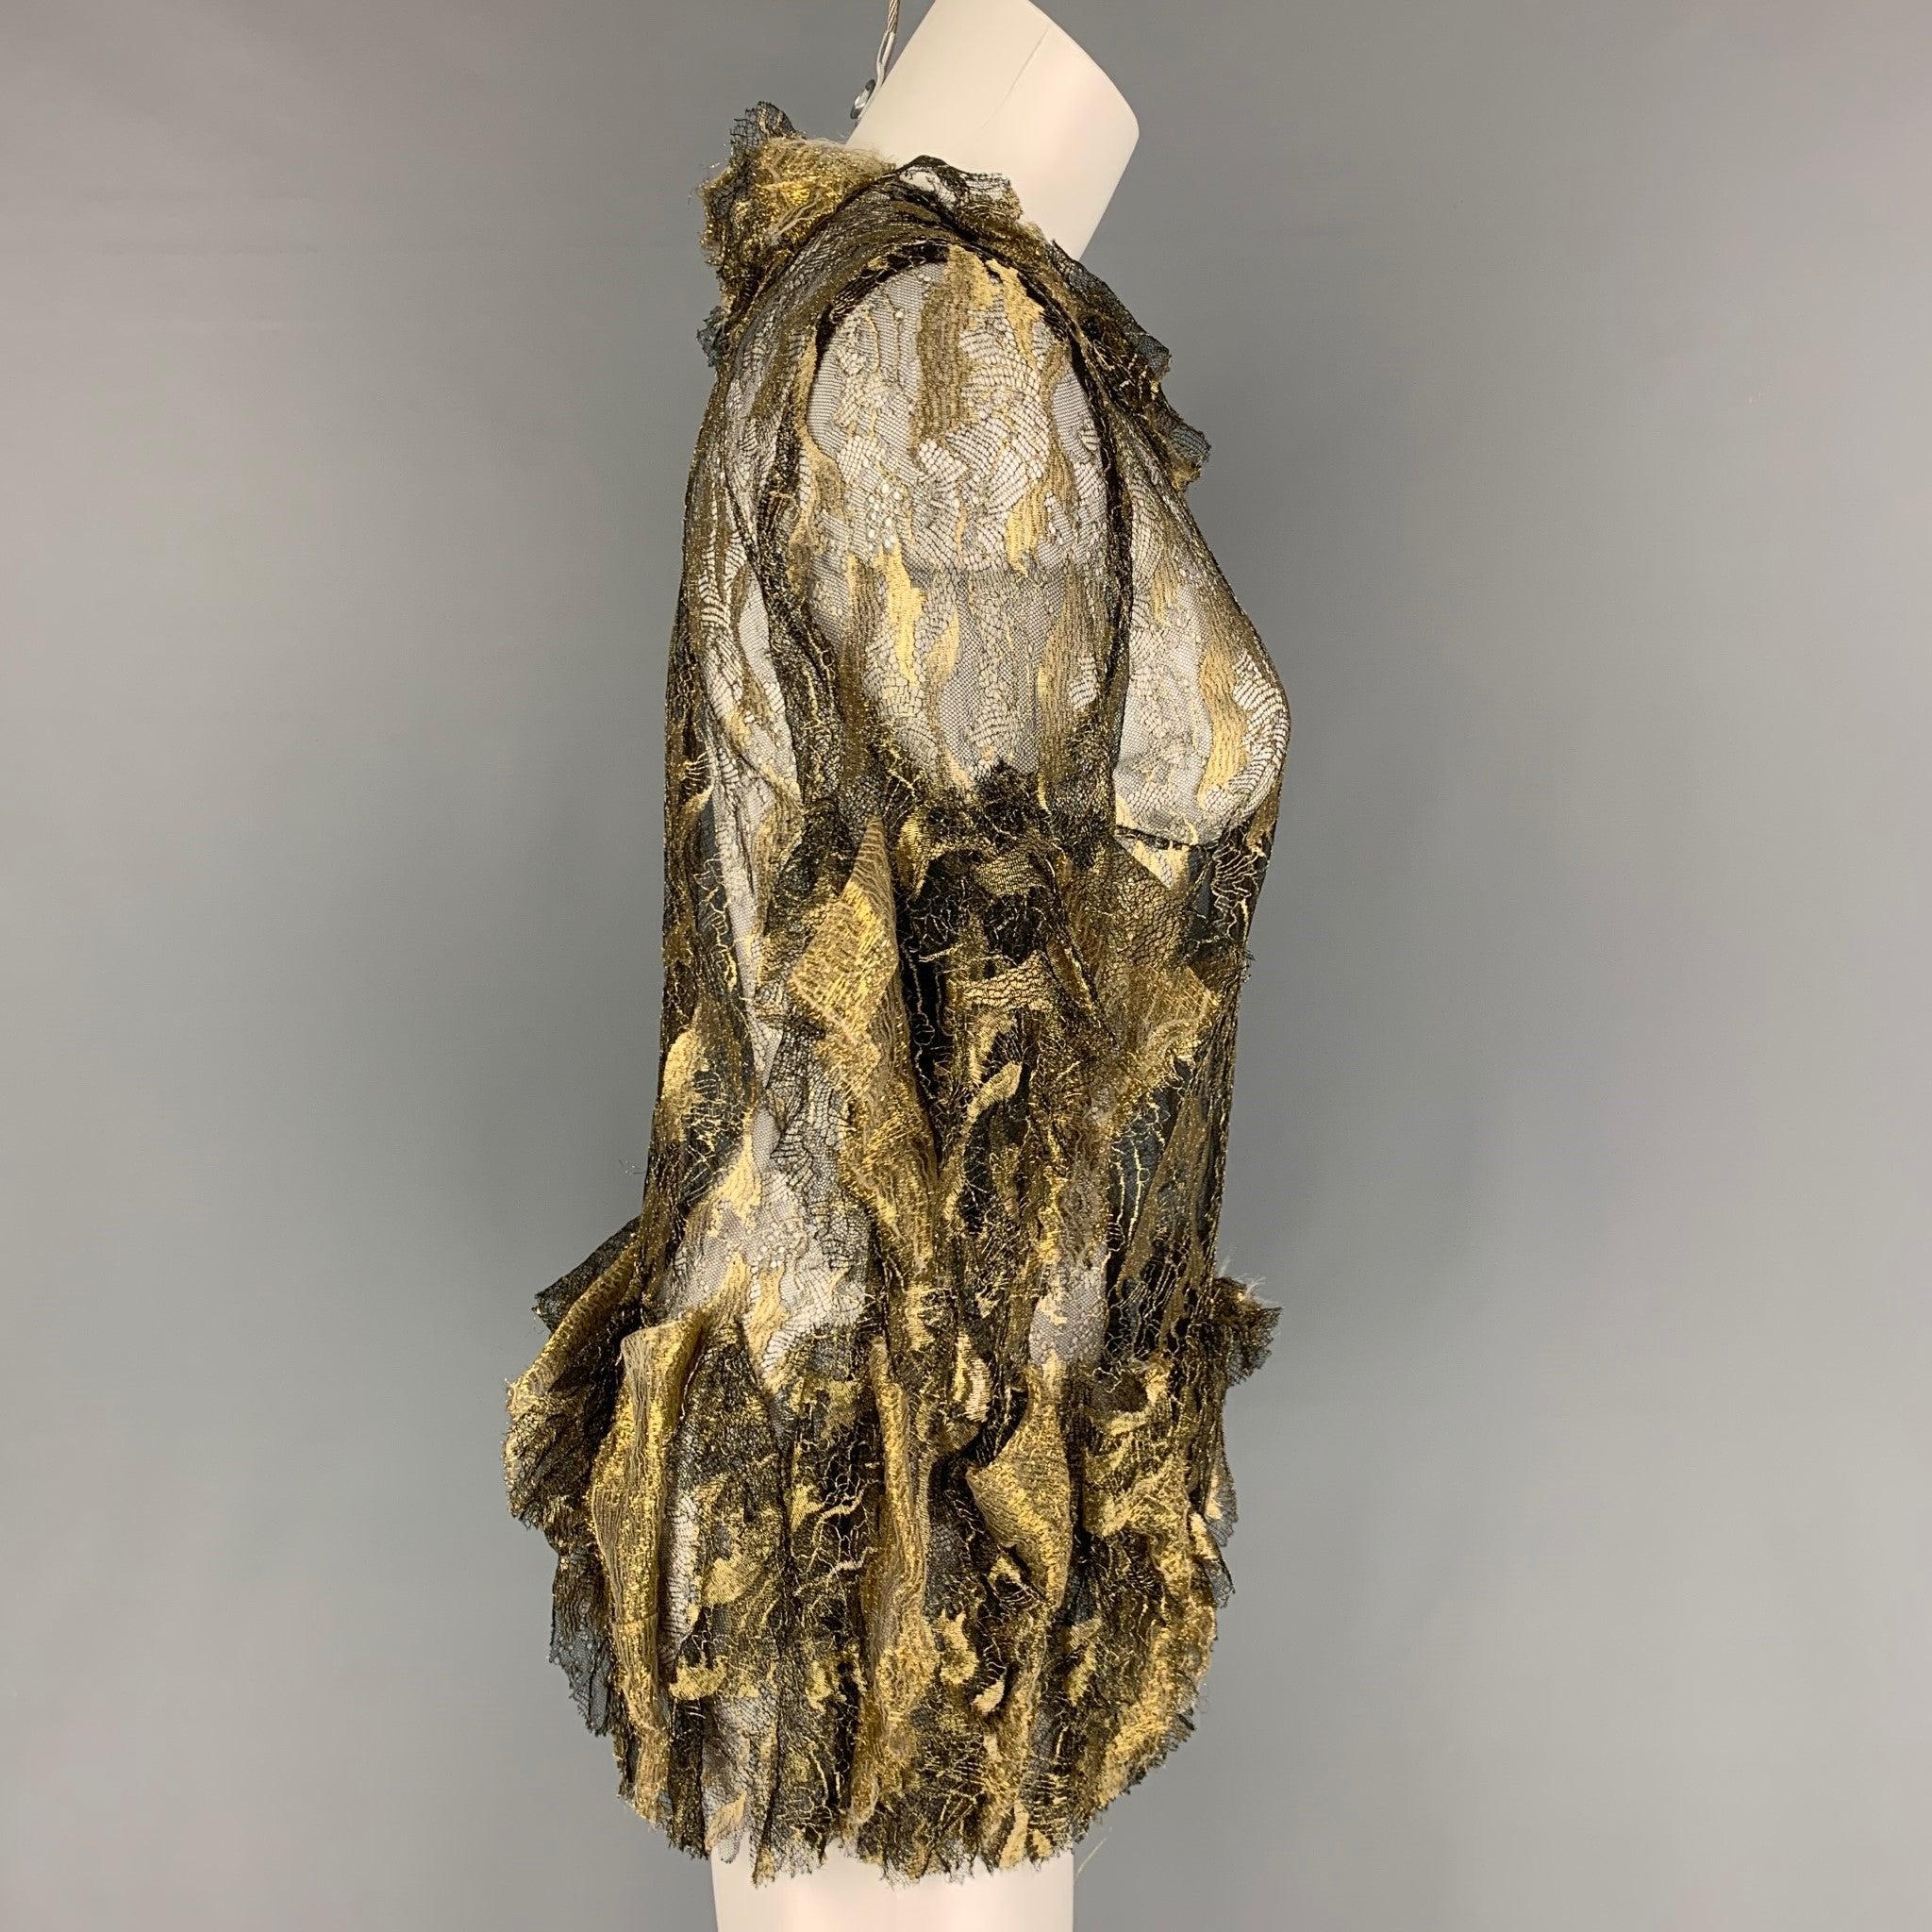 RODARTE dress top comes in a gold & black antique lame polyamide blend featuring a ruffled design, 3/4 sleeves, and a back zip up closure.
Very Good
Pre-Owned Condition. 

Marked:   8 

Measurements: 
 
Shoulder: 14 inches  Bust: 32 inches  Sleeve: